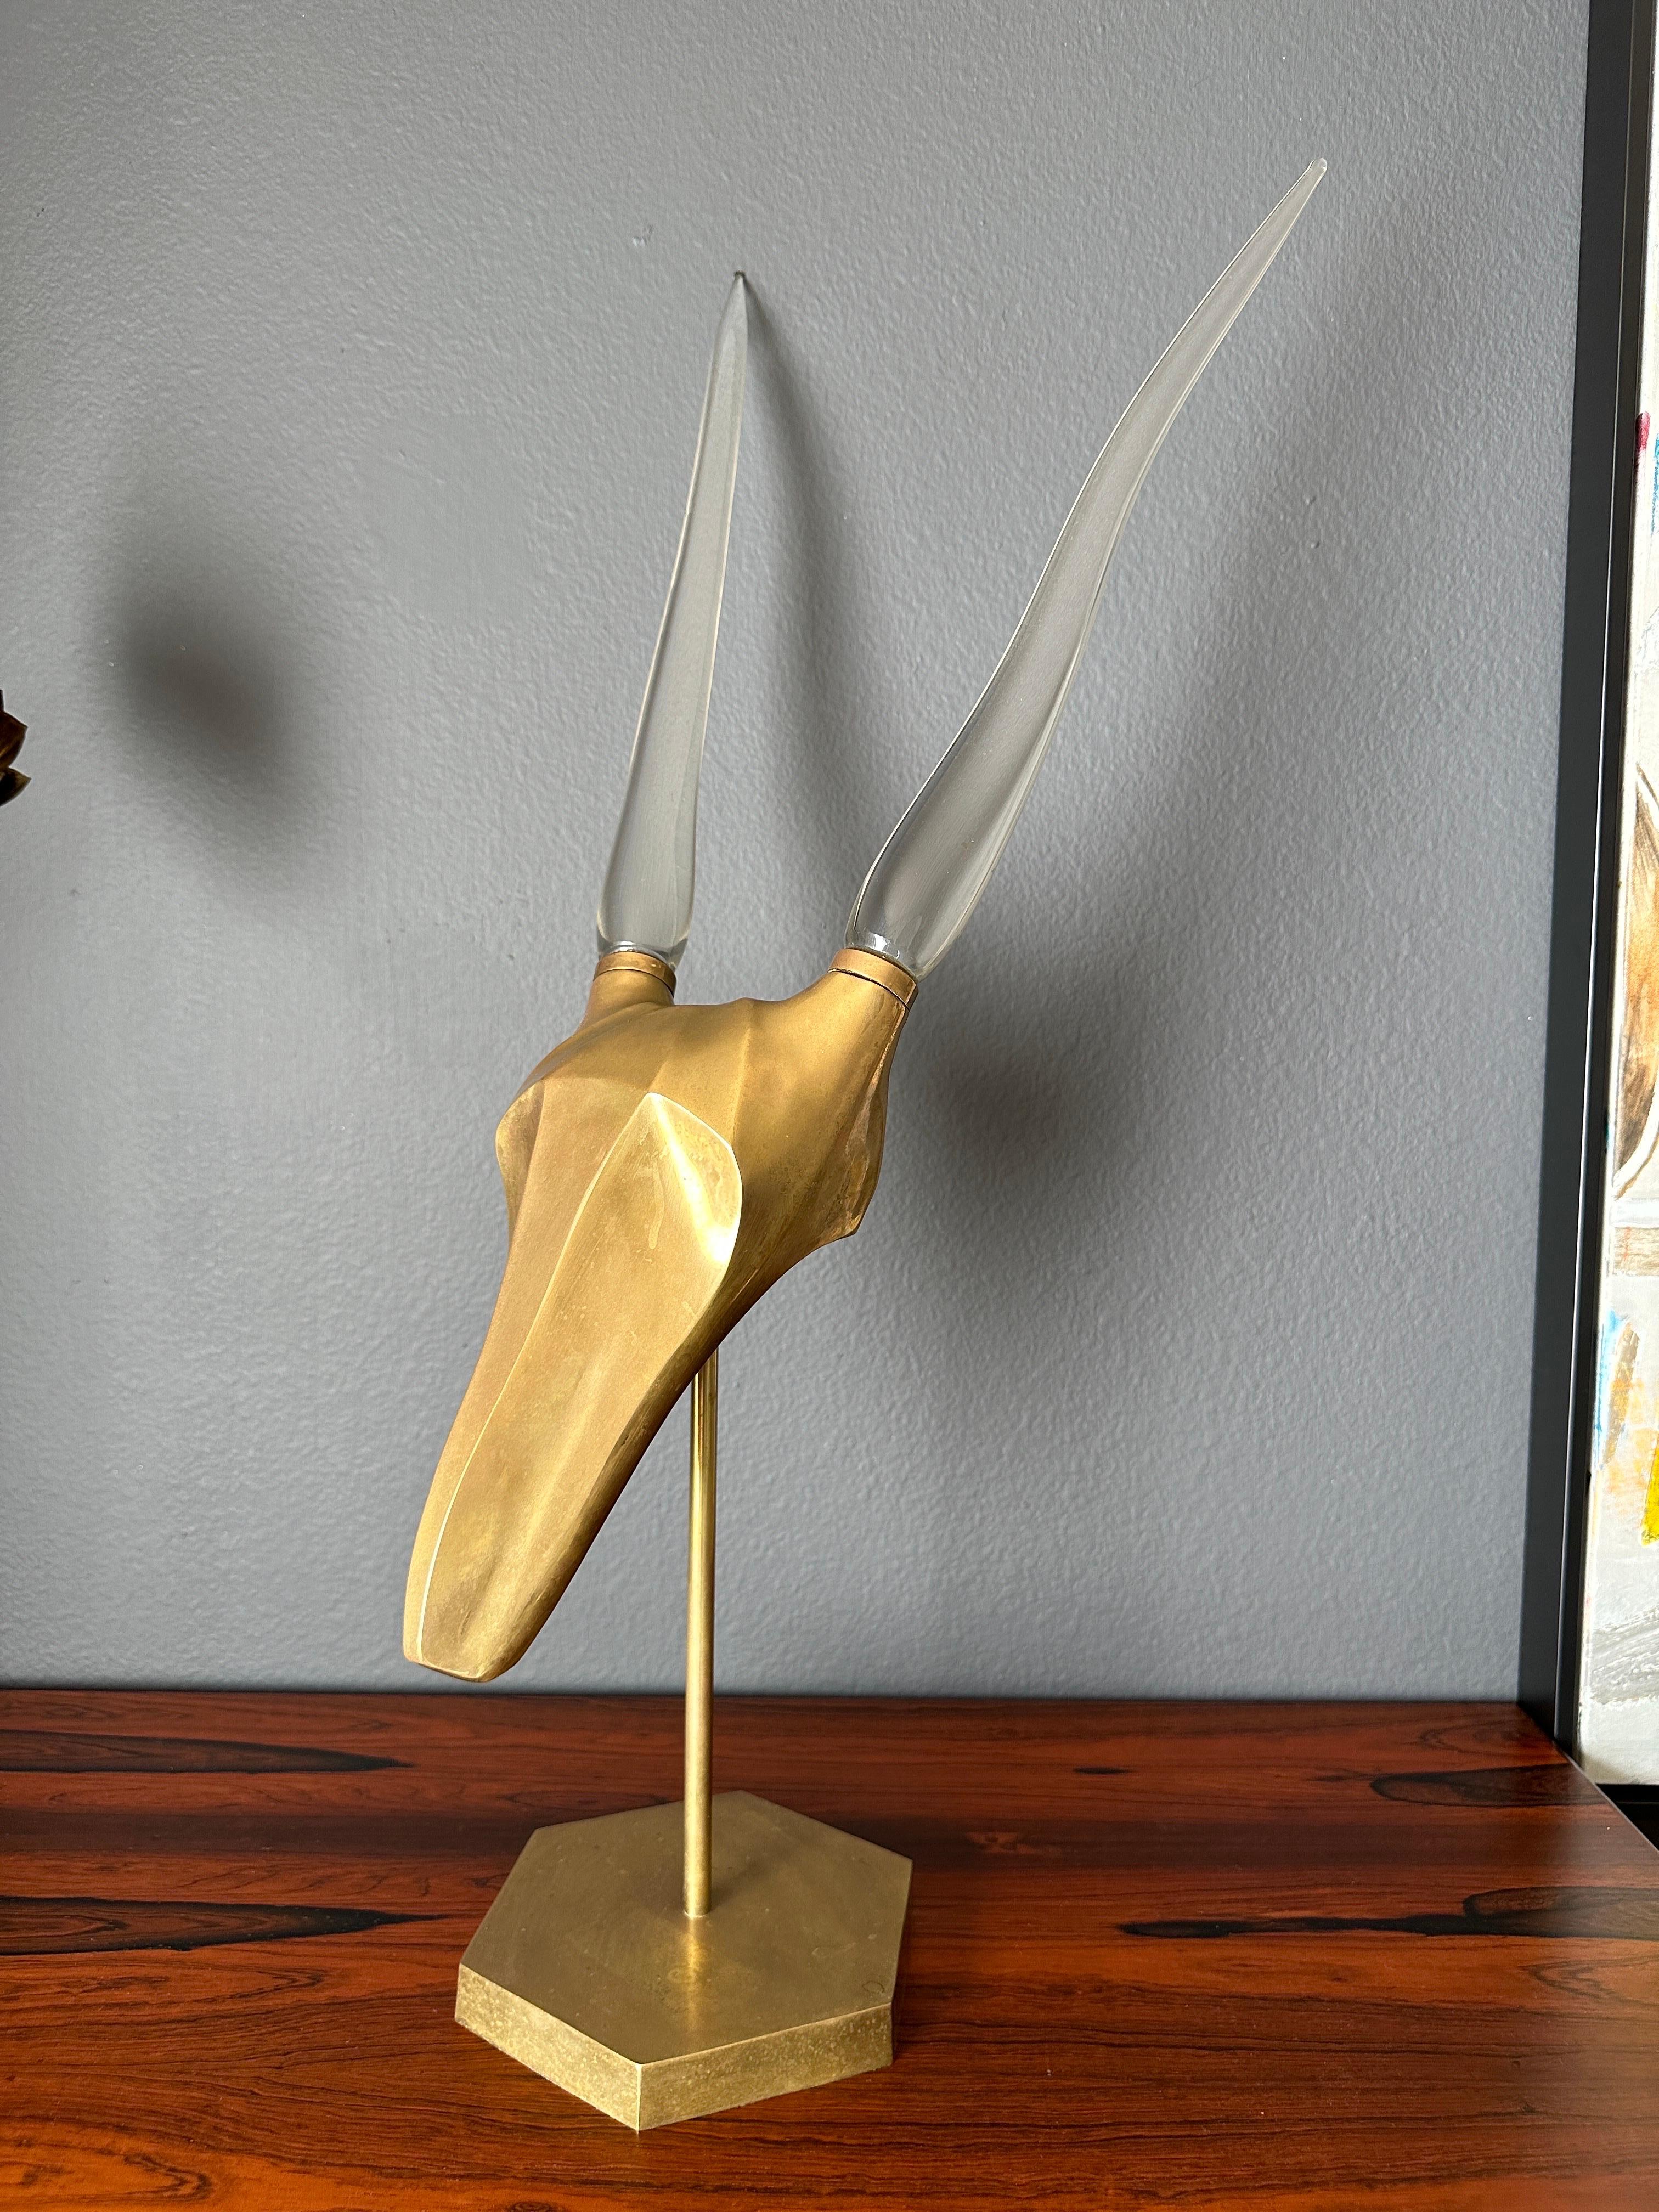 Patinated brass gazelle / antelope sculpture with cast glass horns in the manner of Karl Springer.